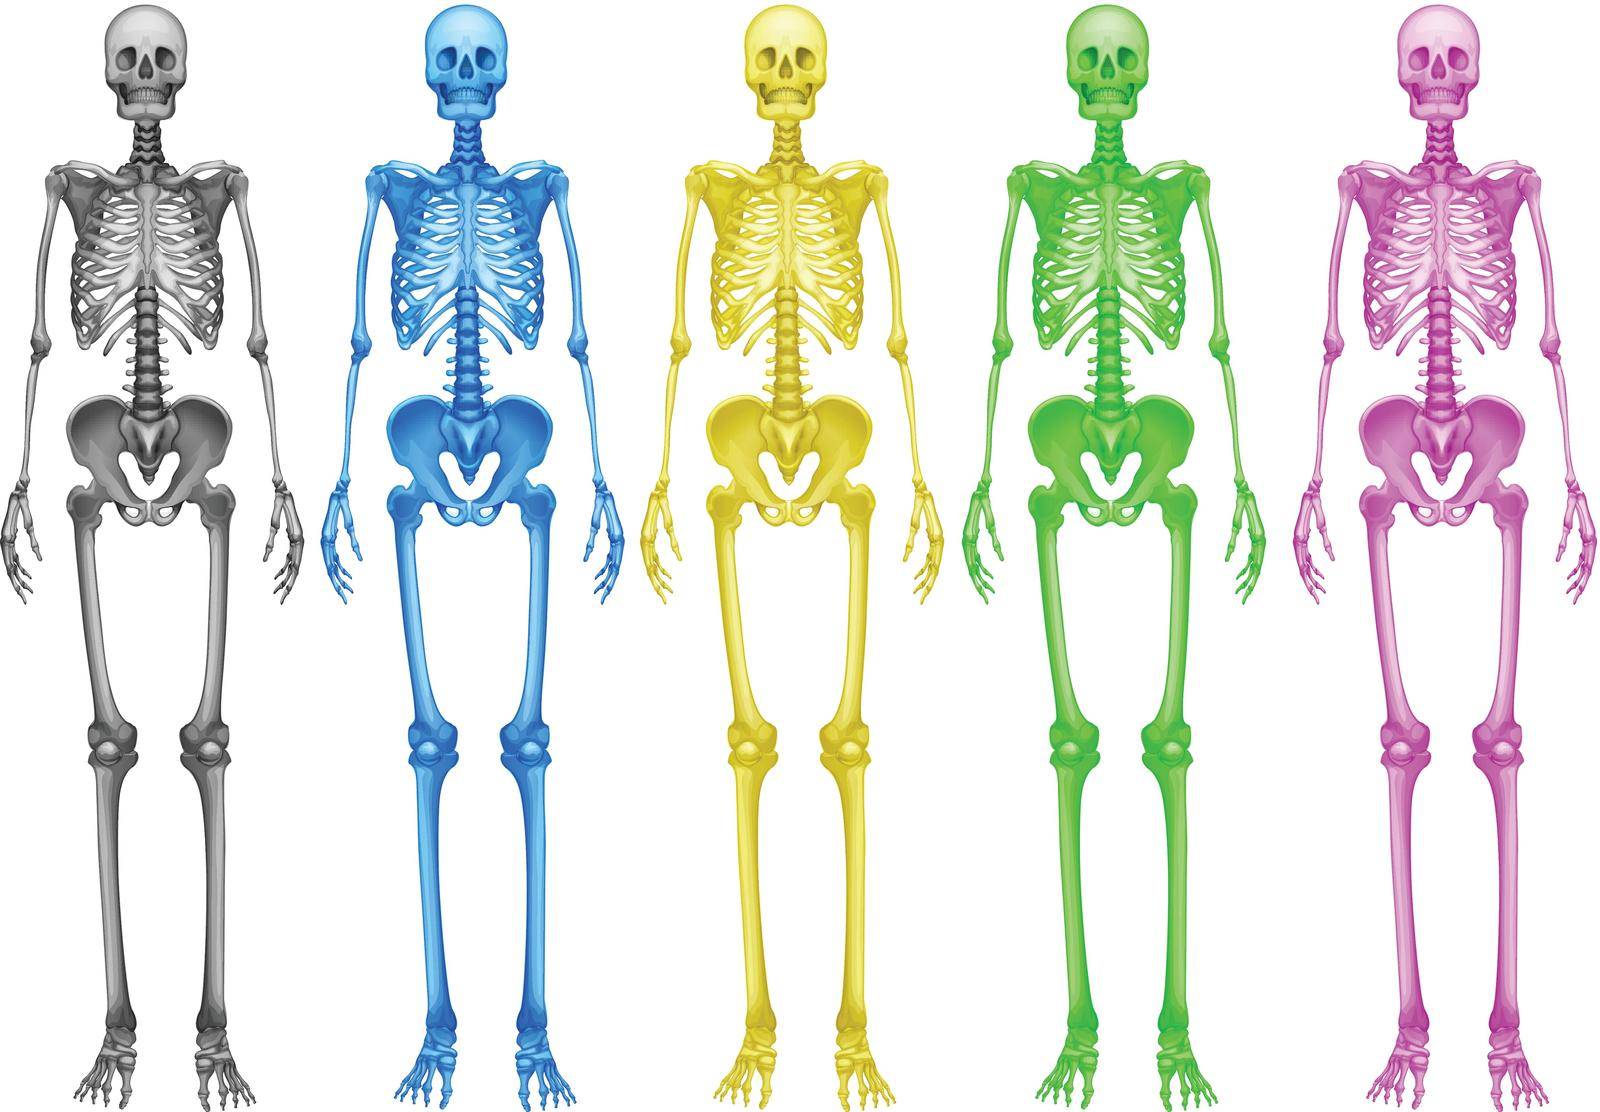 Coloured human skeletons on a white background